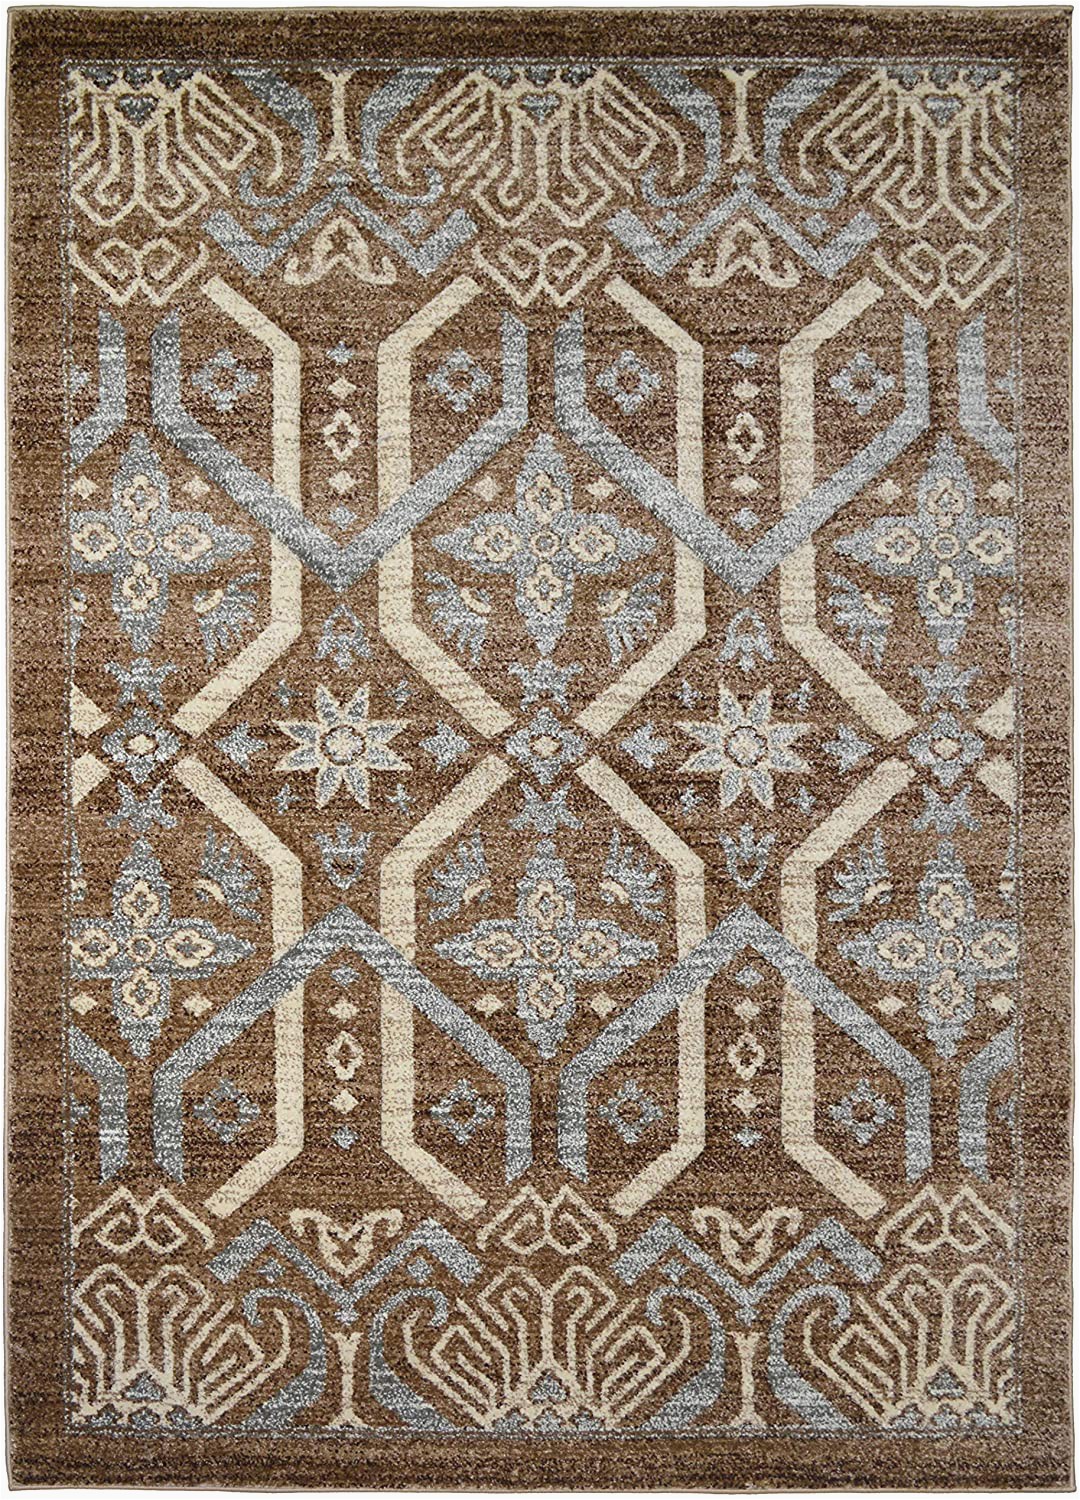 7 by 10 area Rug Amazon Mayberry Rugs Tribeca area Rug 7 10"x9 10